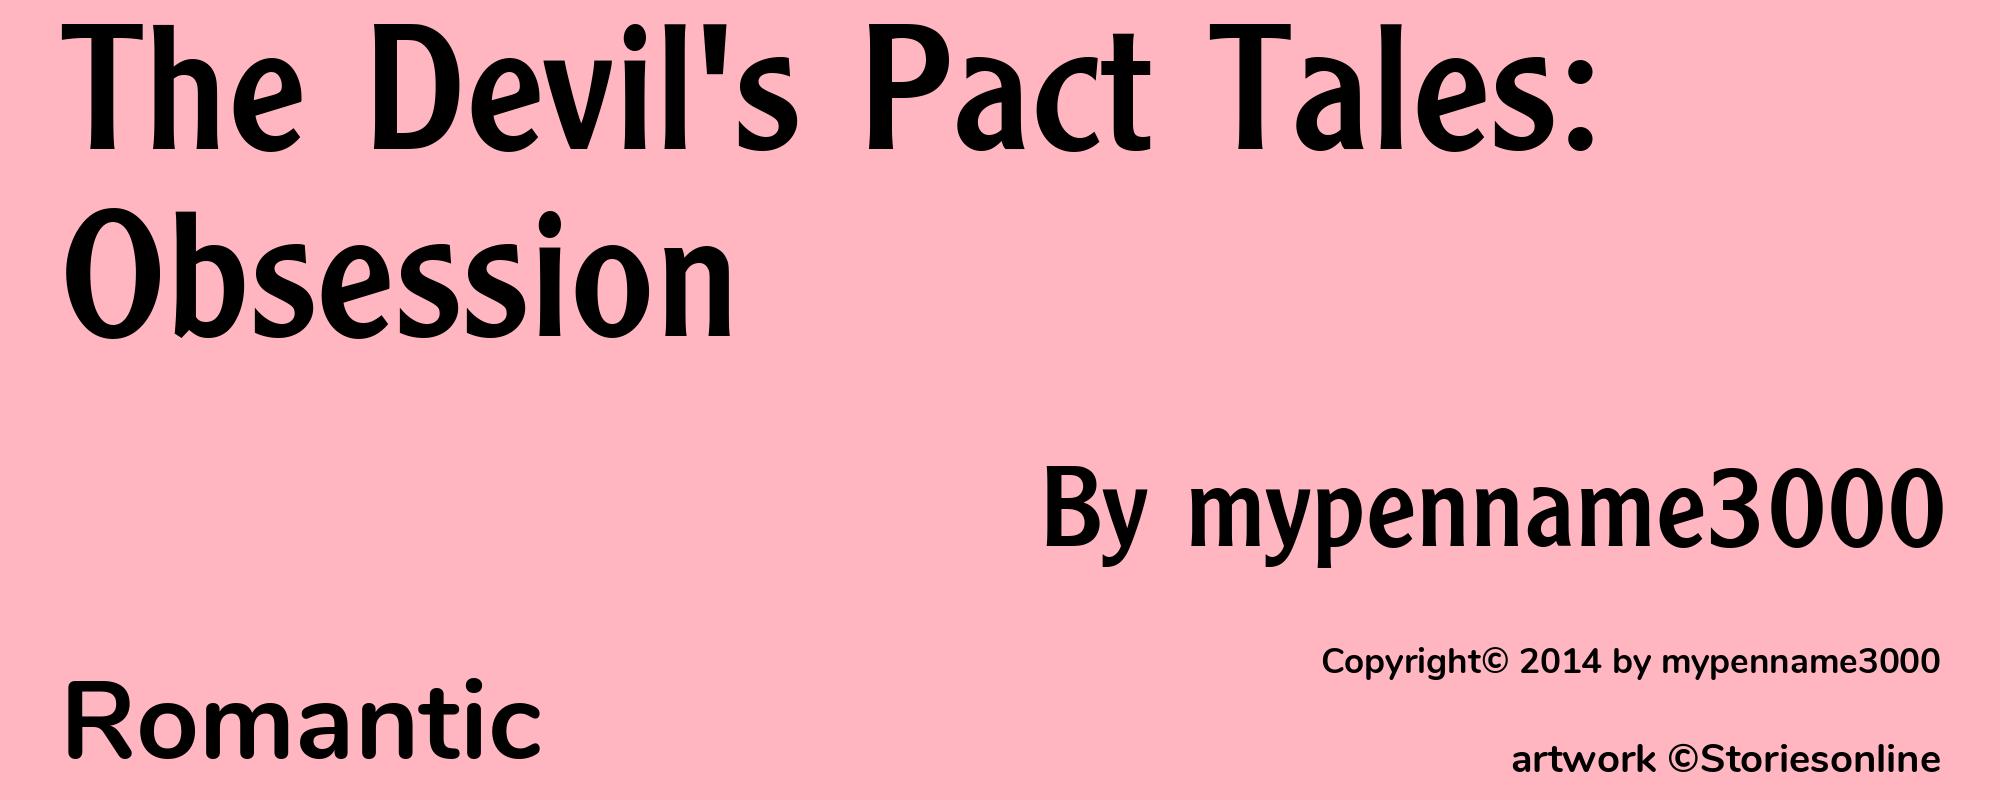 The Devil's Pact Tales: Obsession - Cover